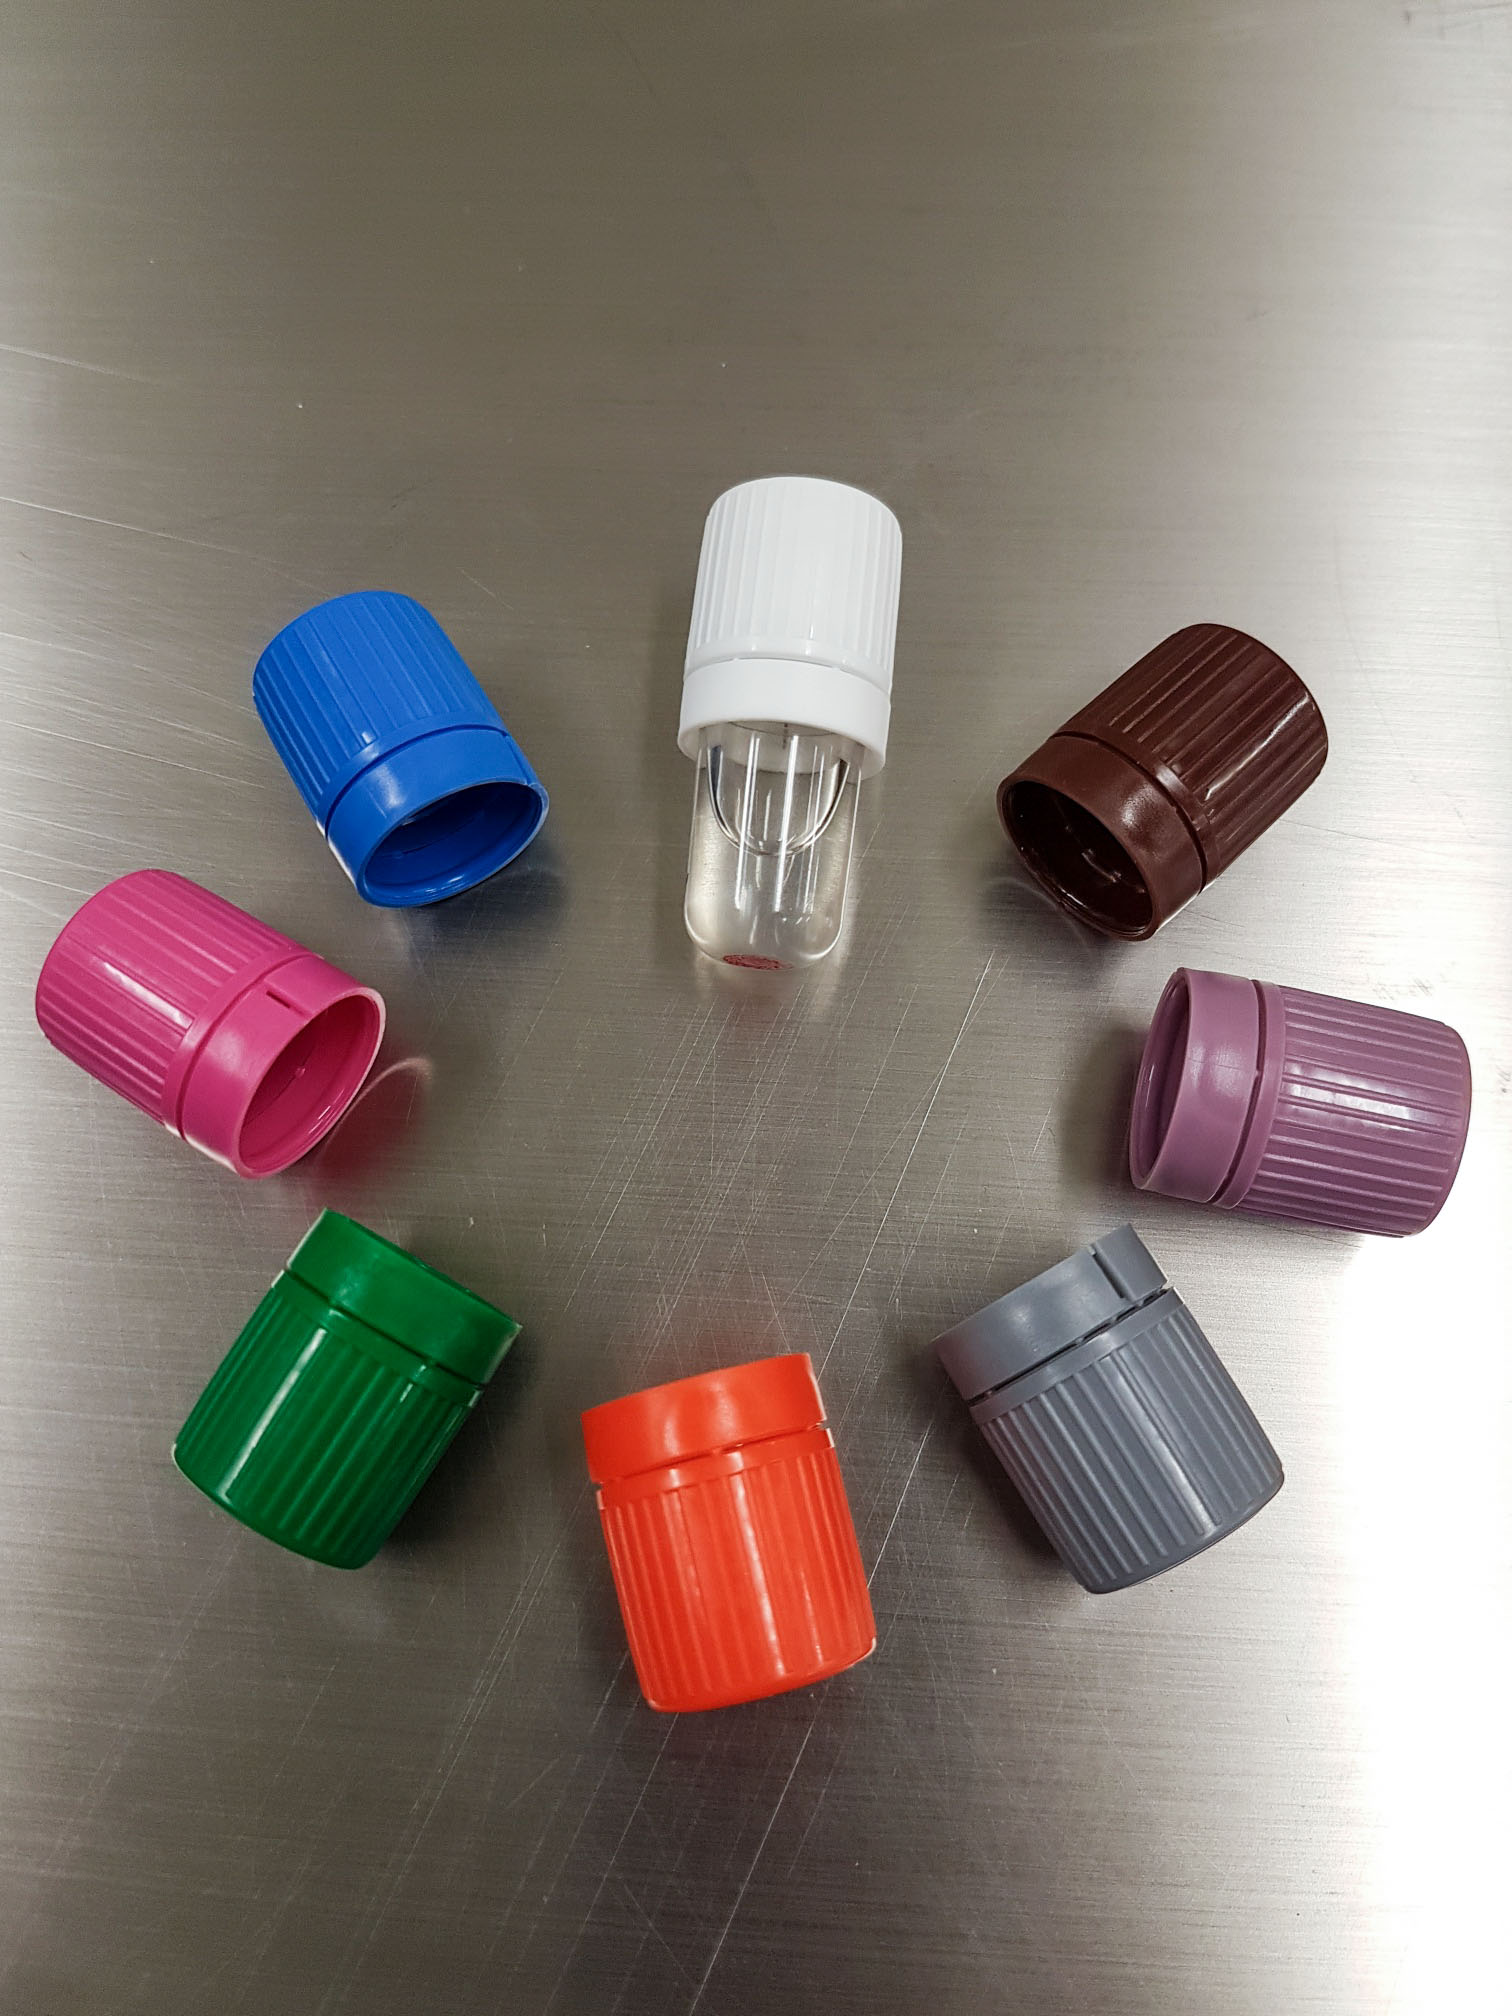 Colored caps distinguish samples for the Amyloid Aggregation investigation